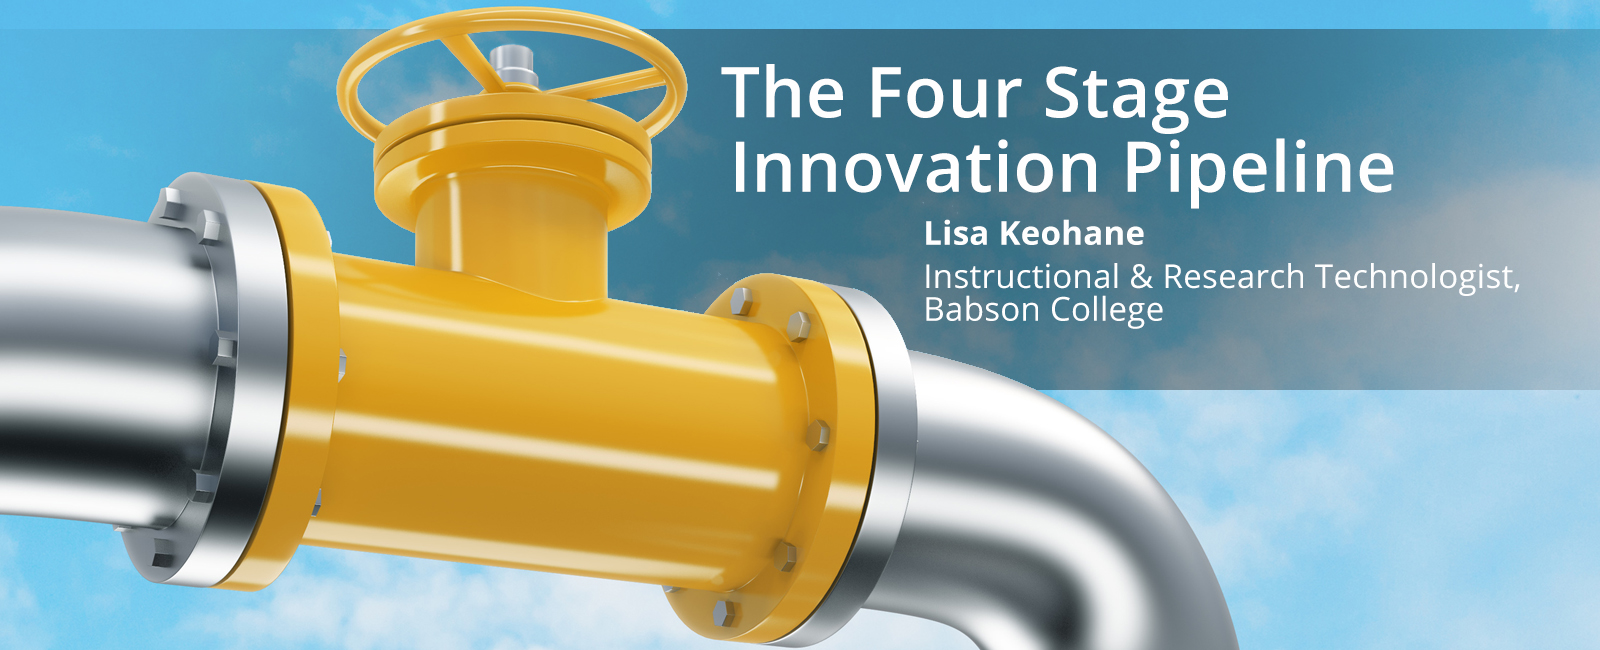 The Four Stage Innovation Pipeline